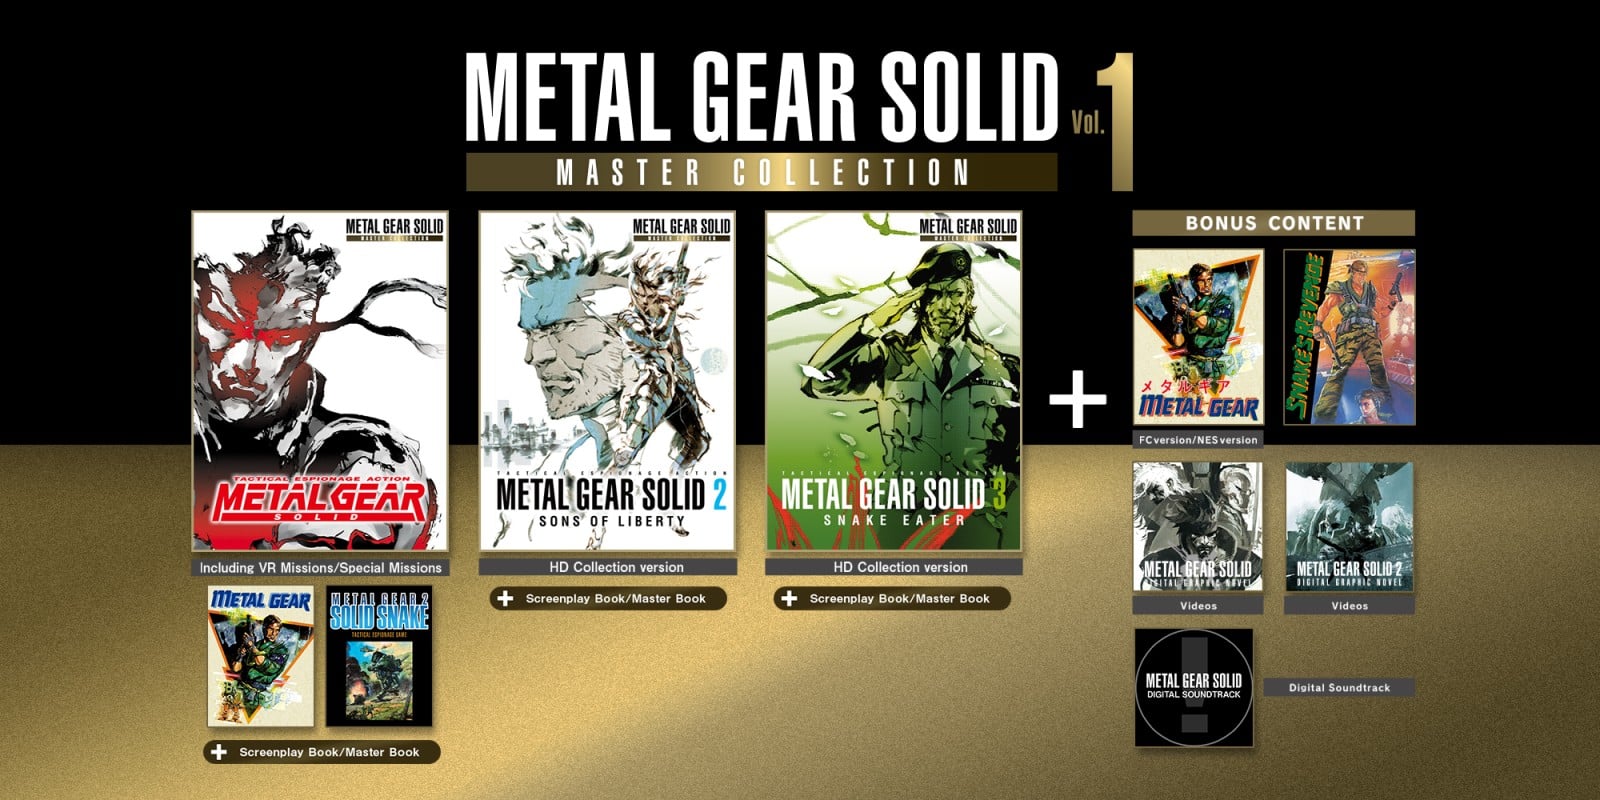 Grab the Metal Gear Solid Master Collection for 20% Off on Steam